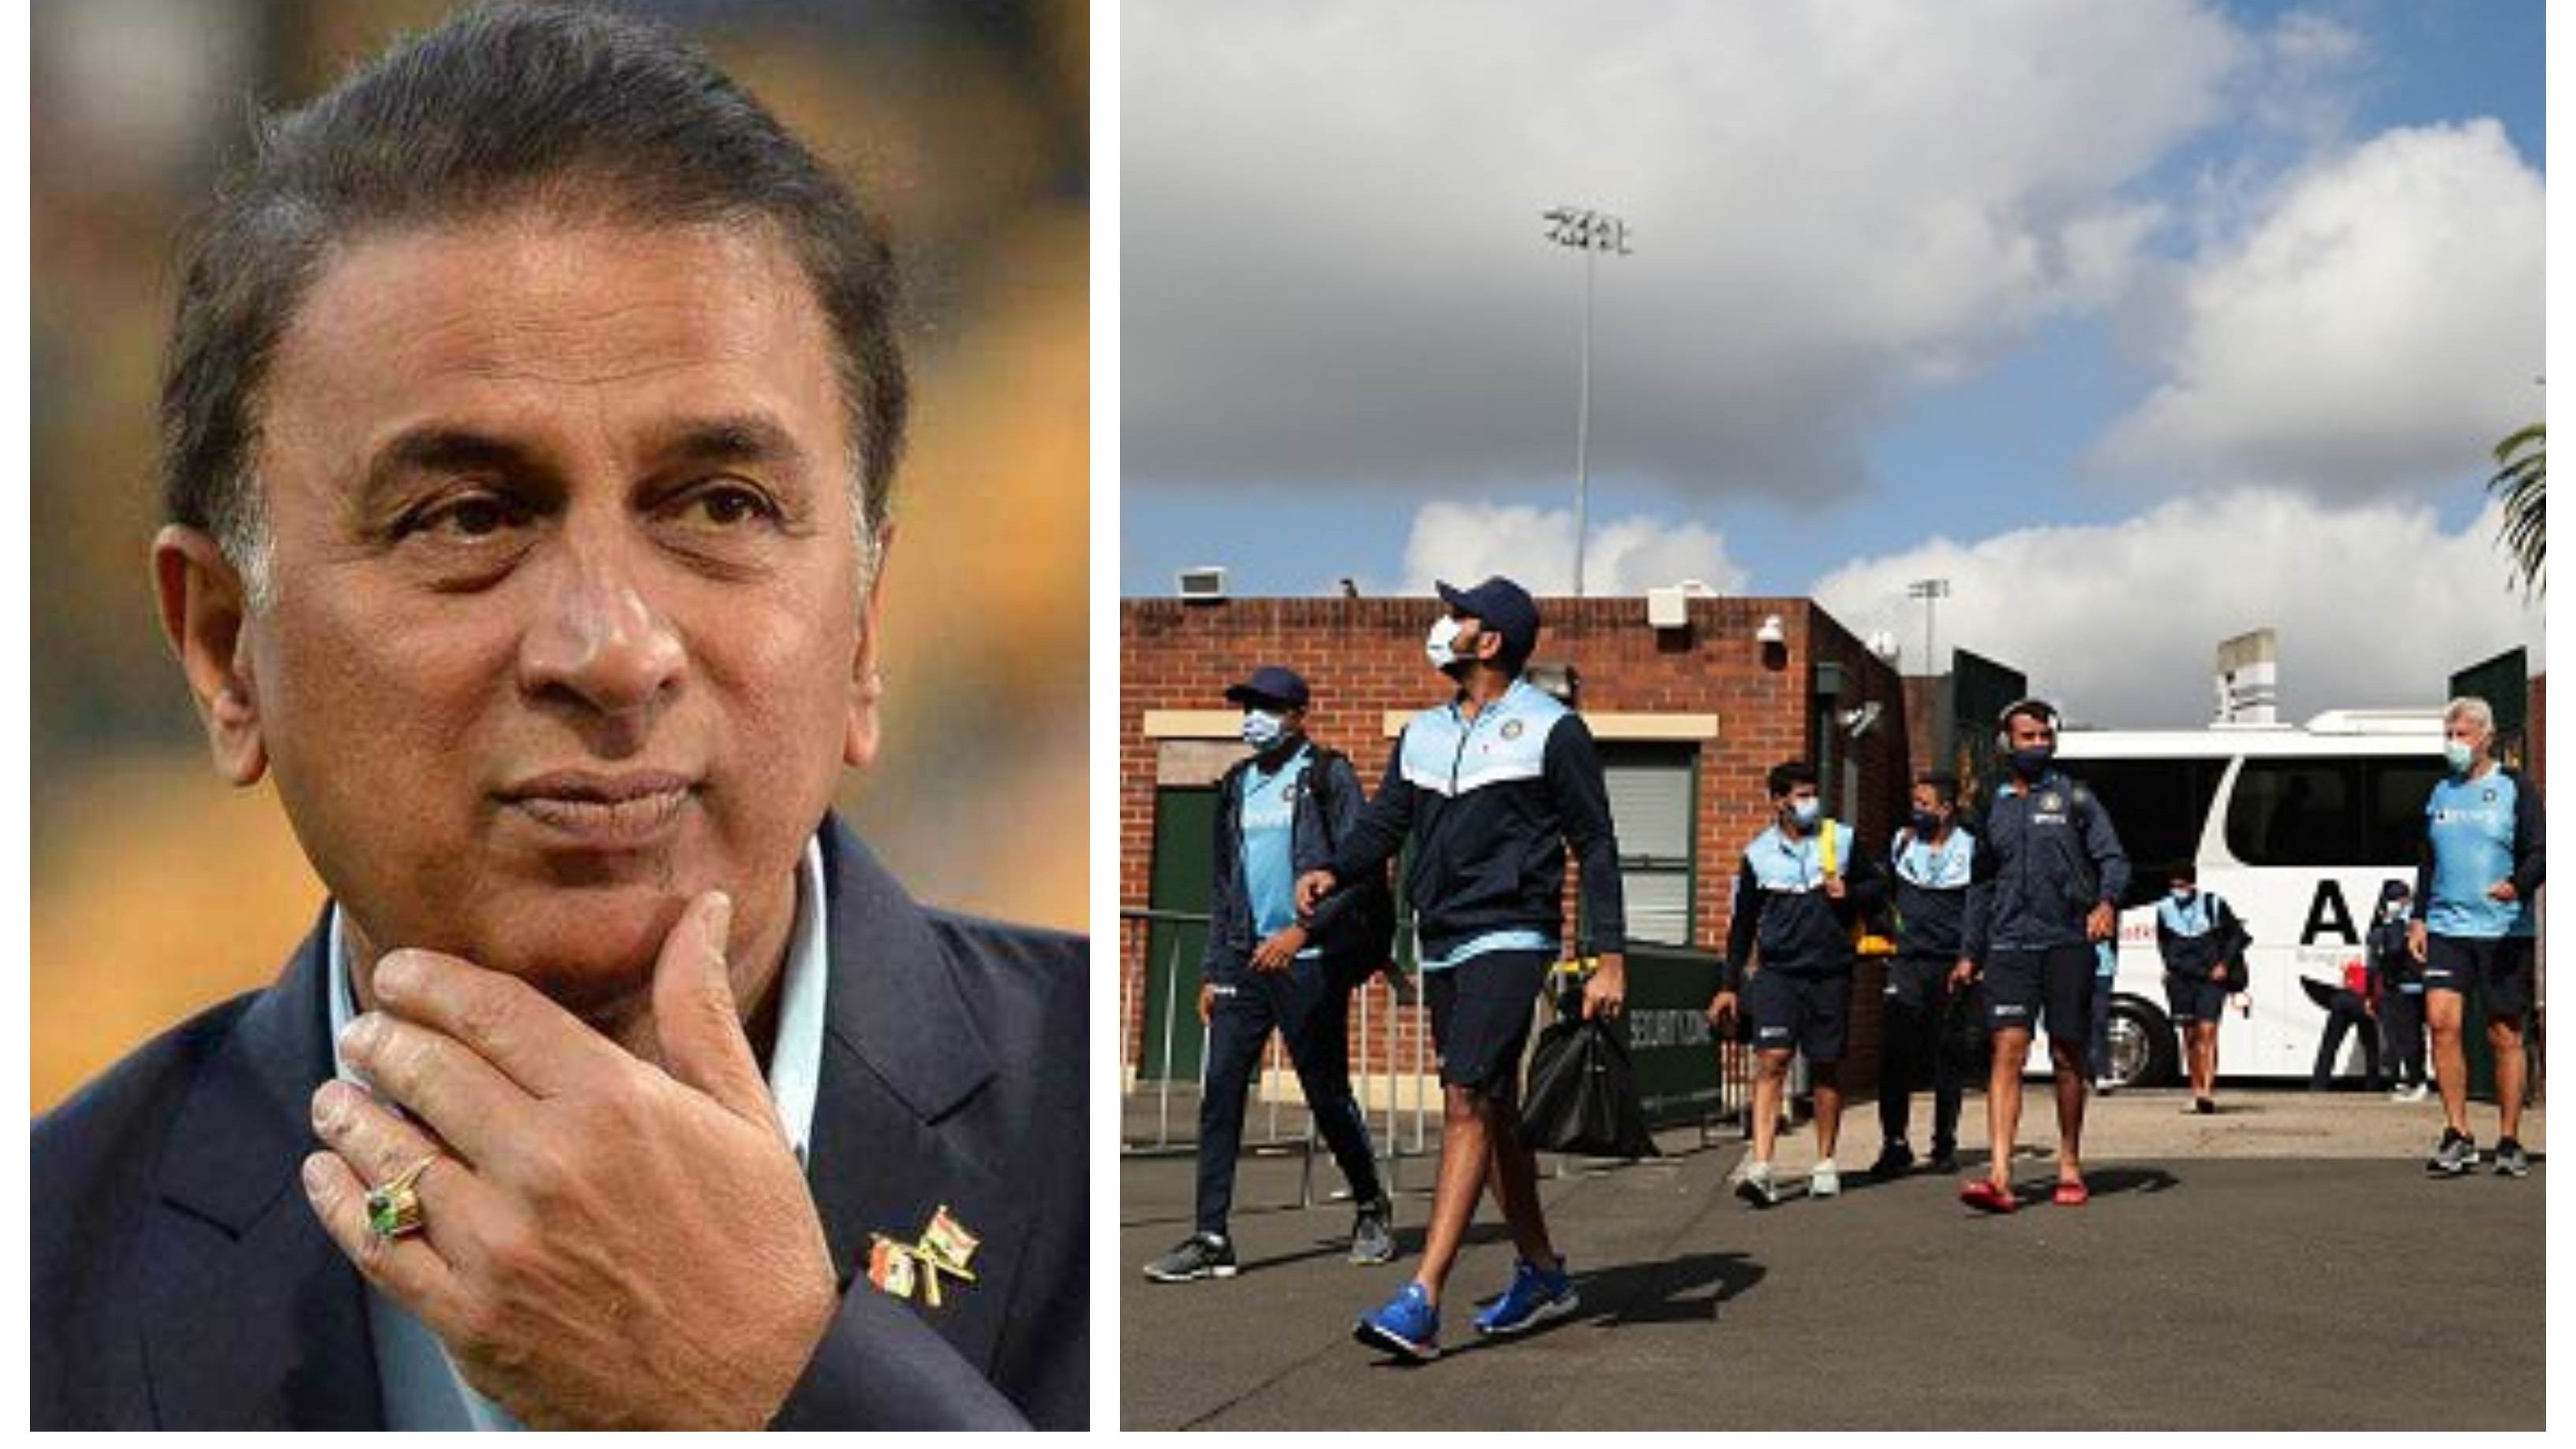 AUS v IND 2020-21: Gavaskar supports BCCI’s decision to ask for relaxation on strict quarantine protocol in Brisbane